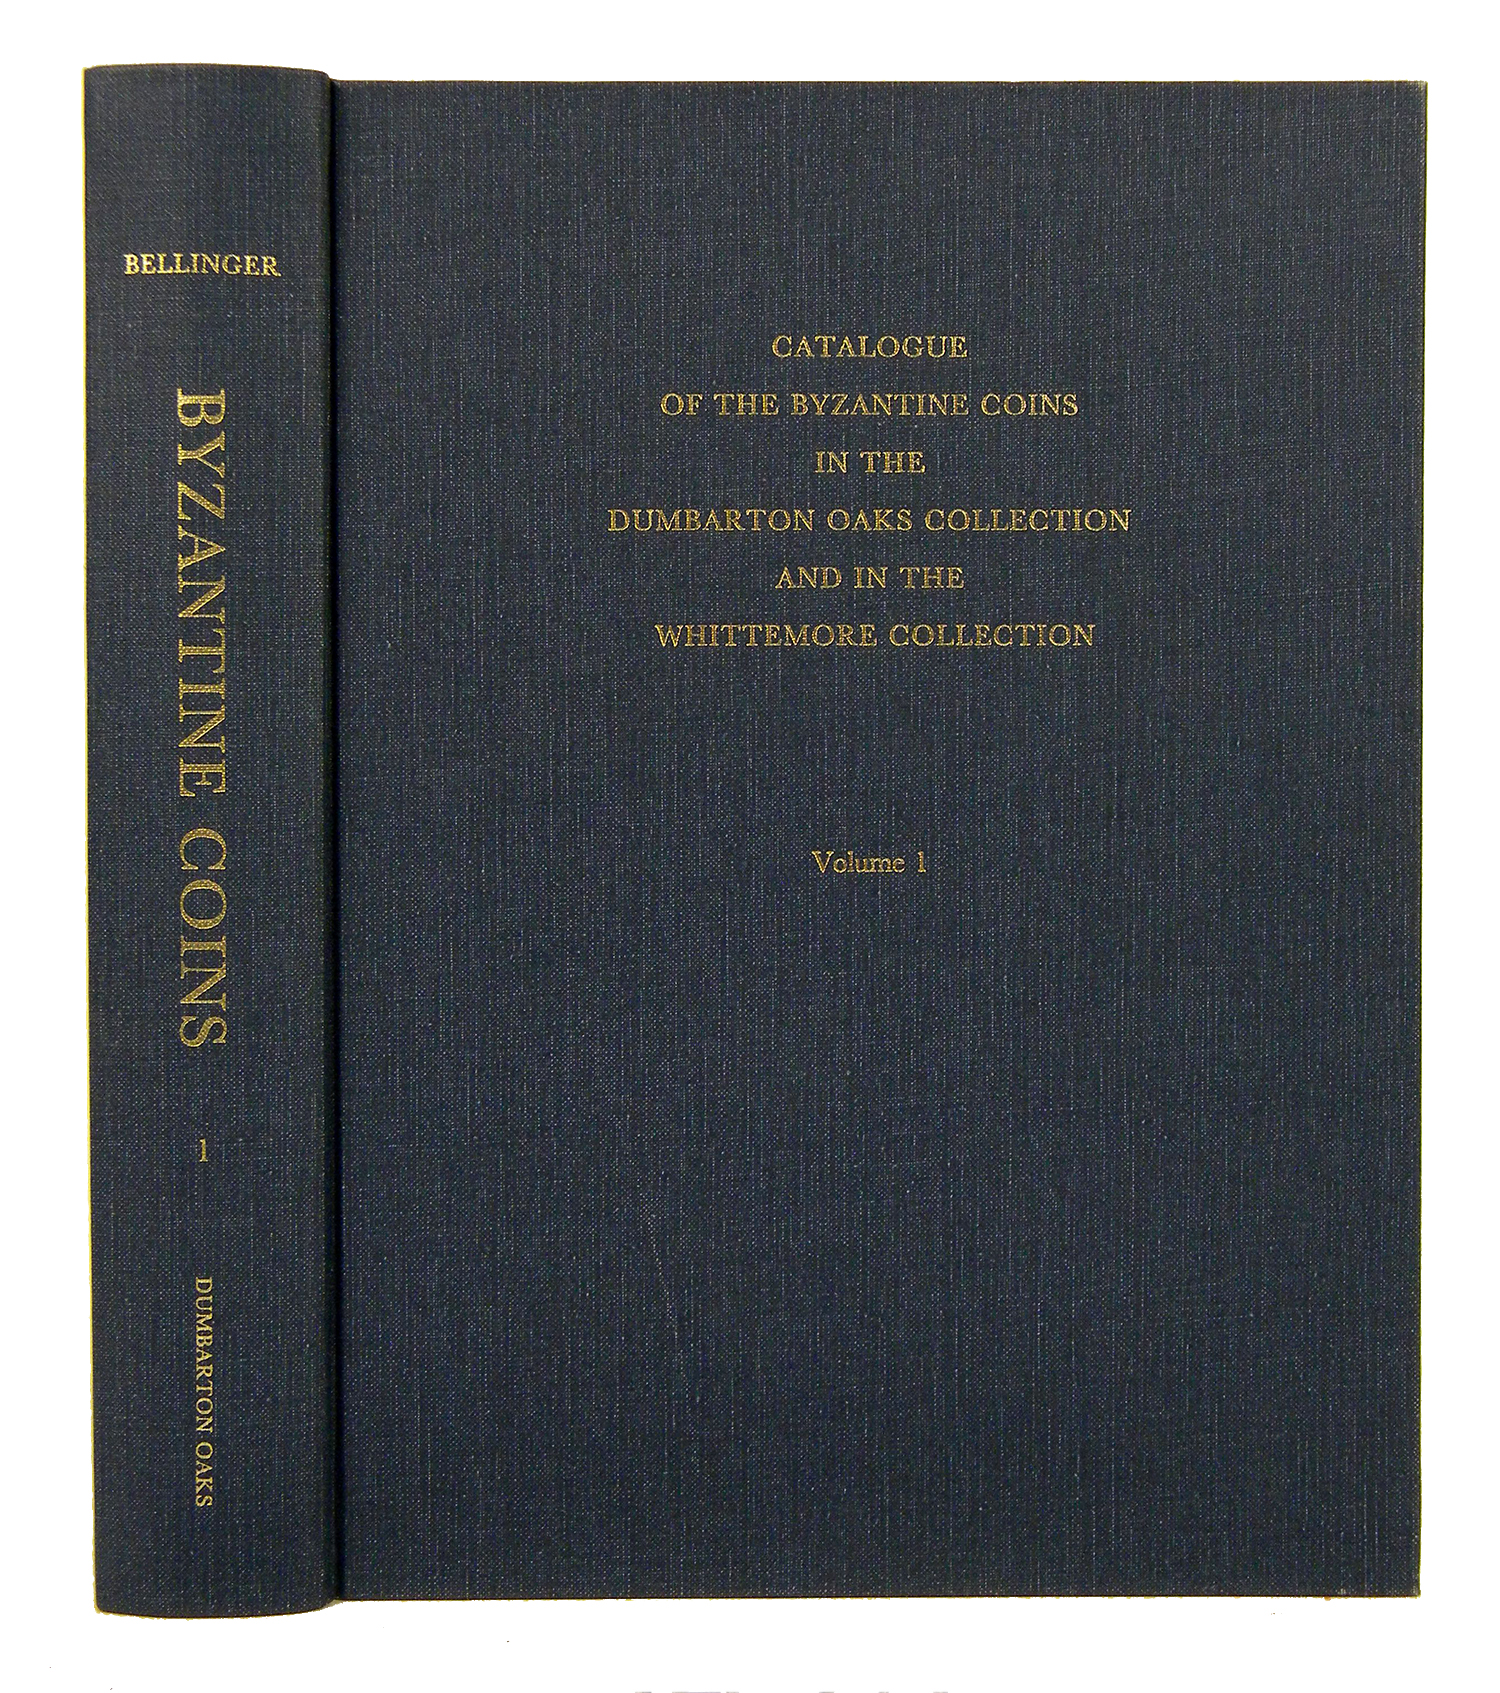 Bellinger, Alfred R., and Philip Grierson [editors]. CATALOGUE OF THE BYZANTINE COINS IN THE